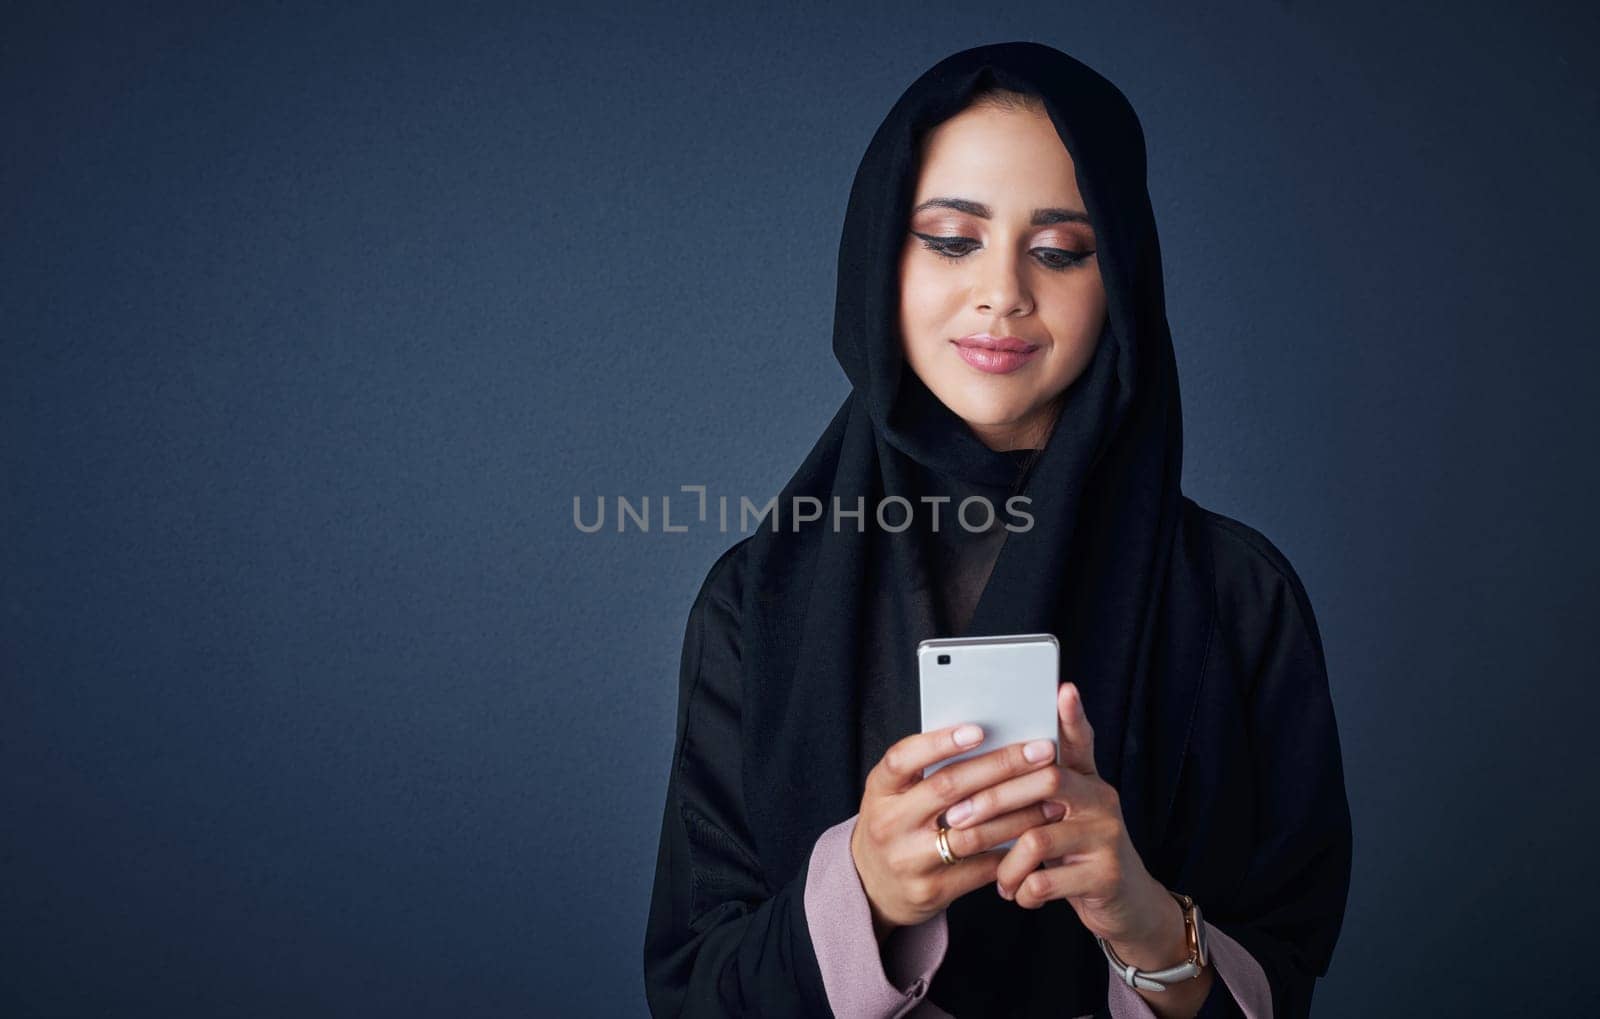 Keeping her lifestyle mobile. Studio shot of a young woman wearing a burqa and using a mobile phone against a gray background. by YuriArcurs